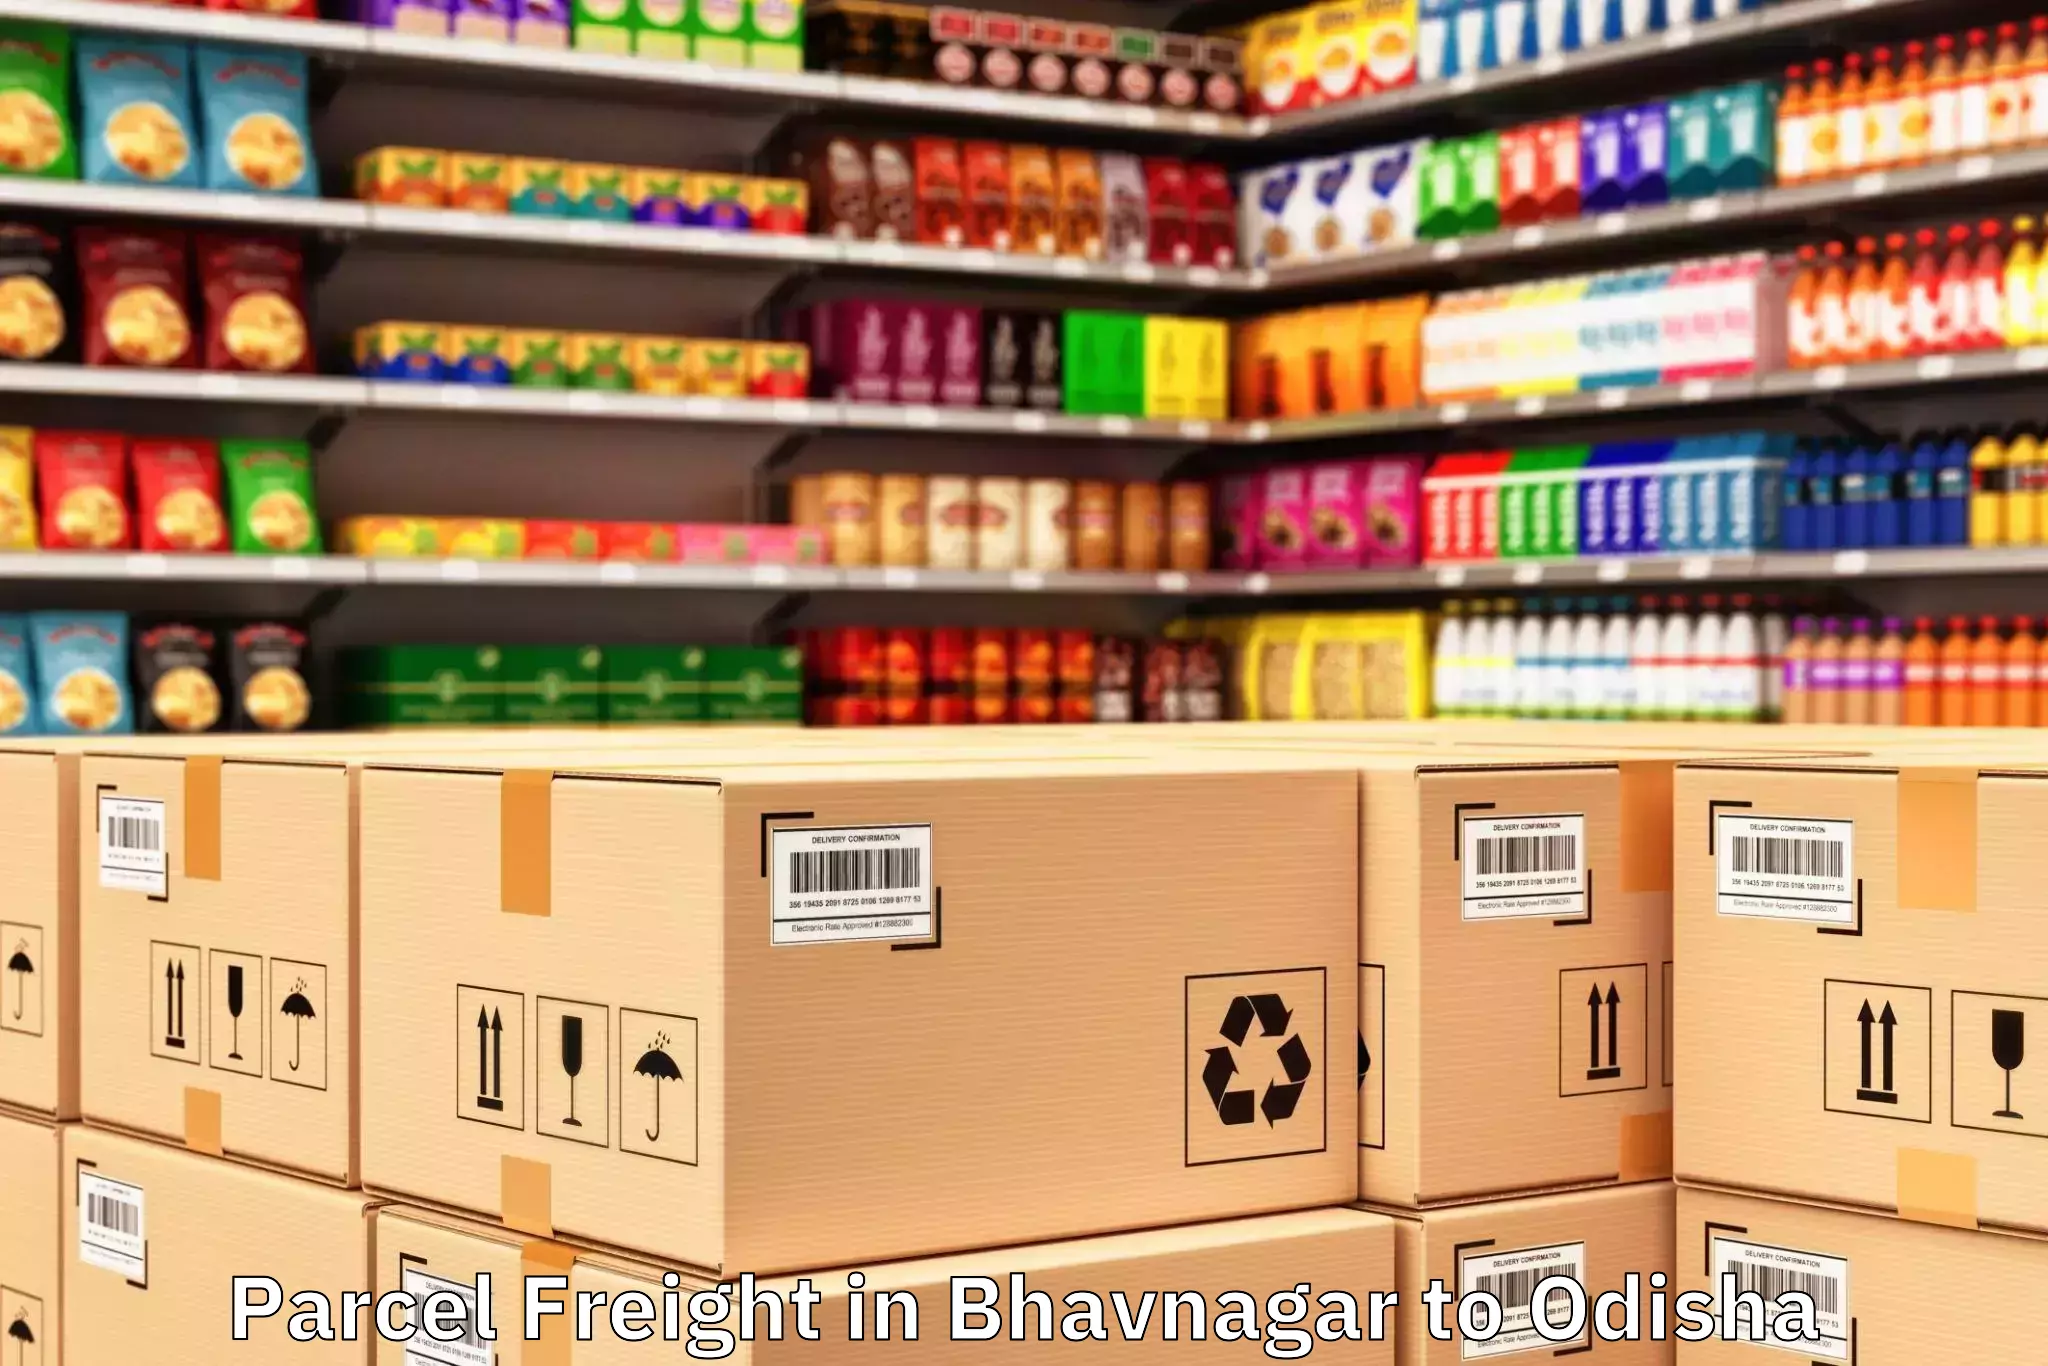 Top Bhavnagar to Belpara Parcel Freight Available